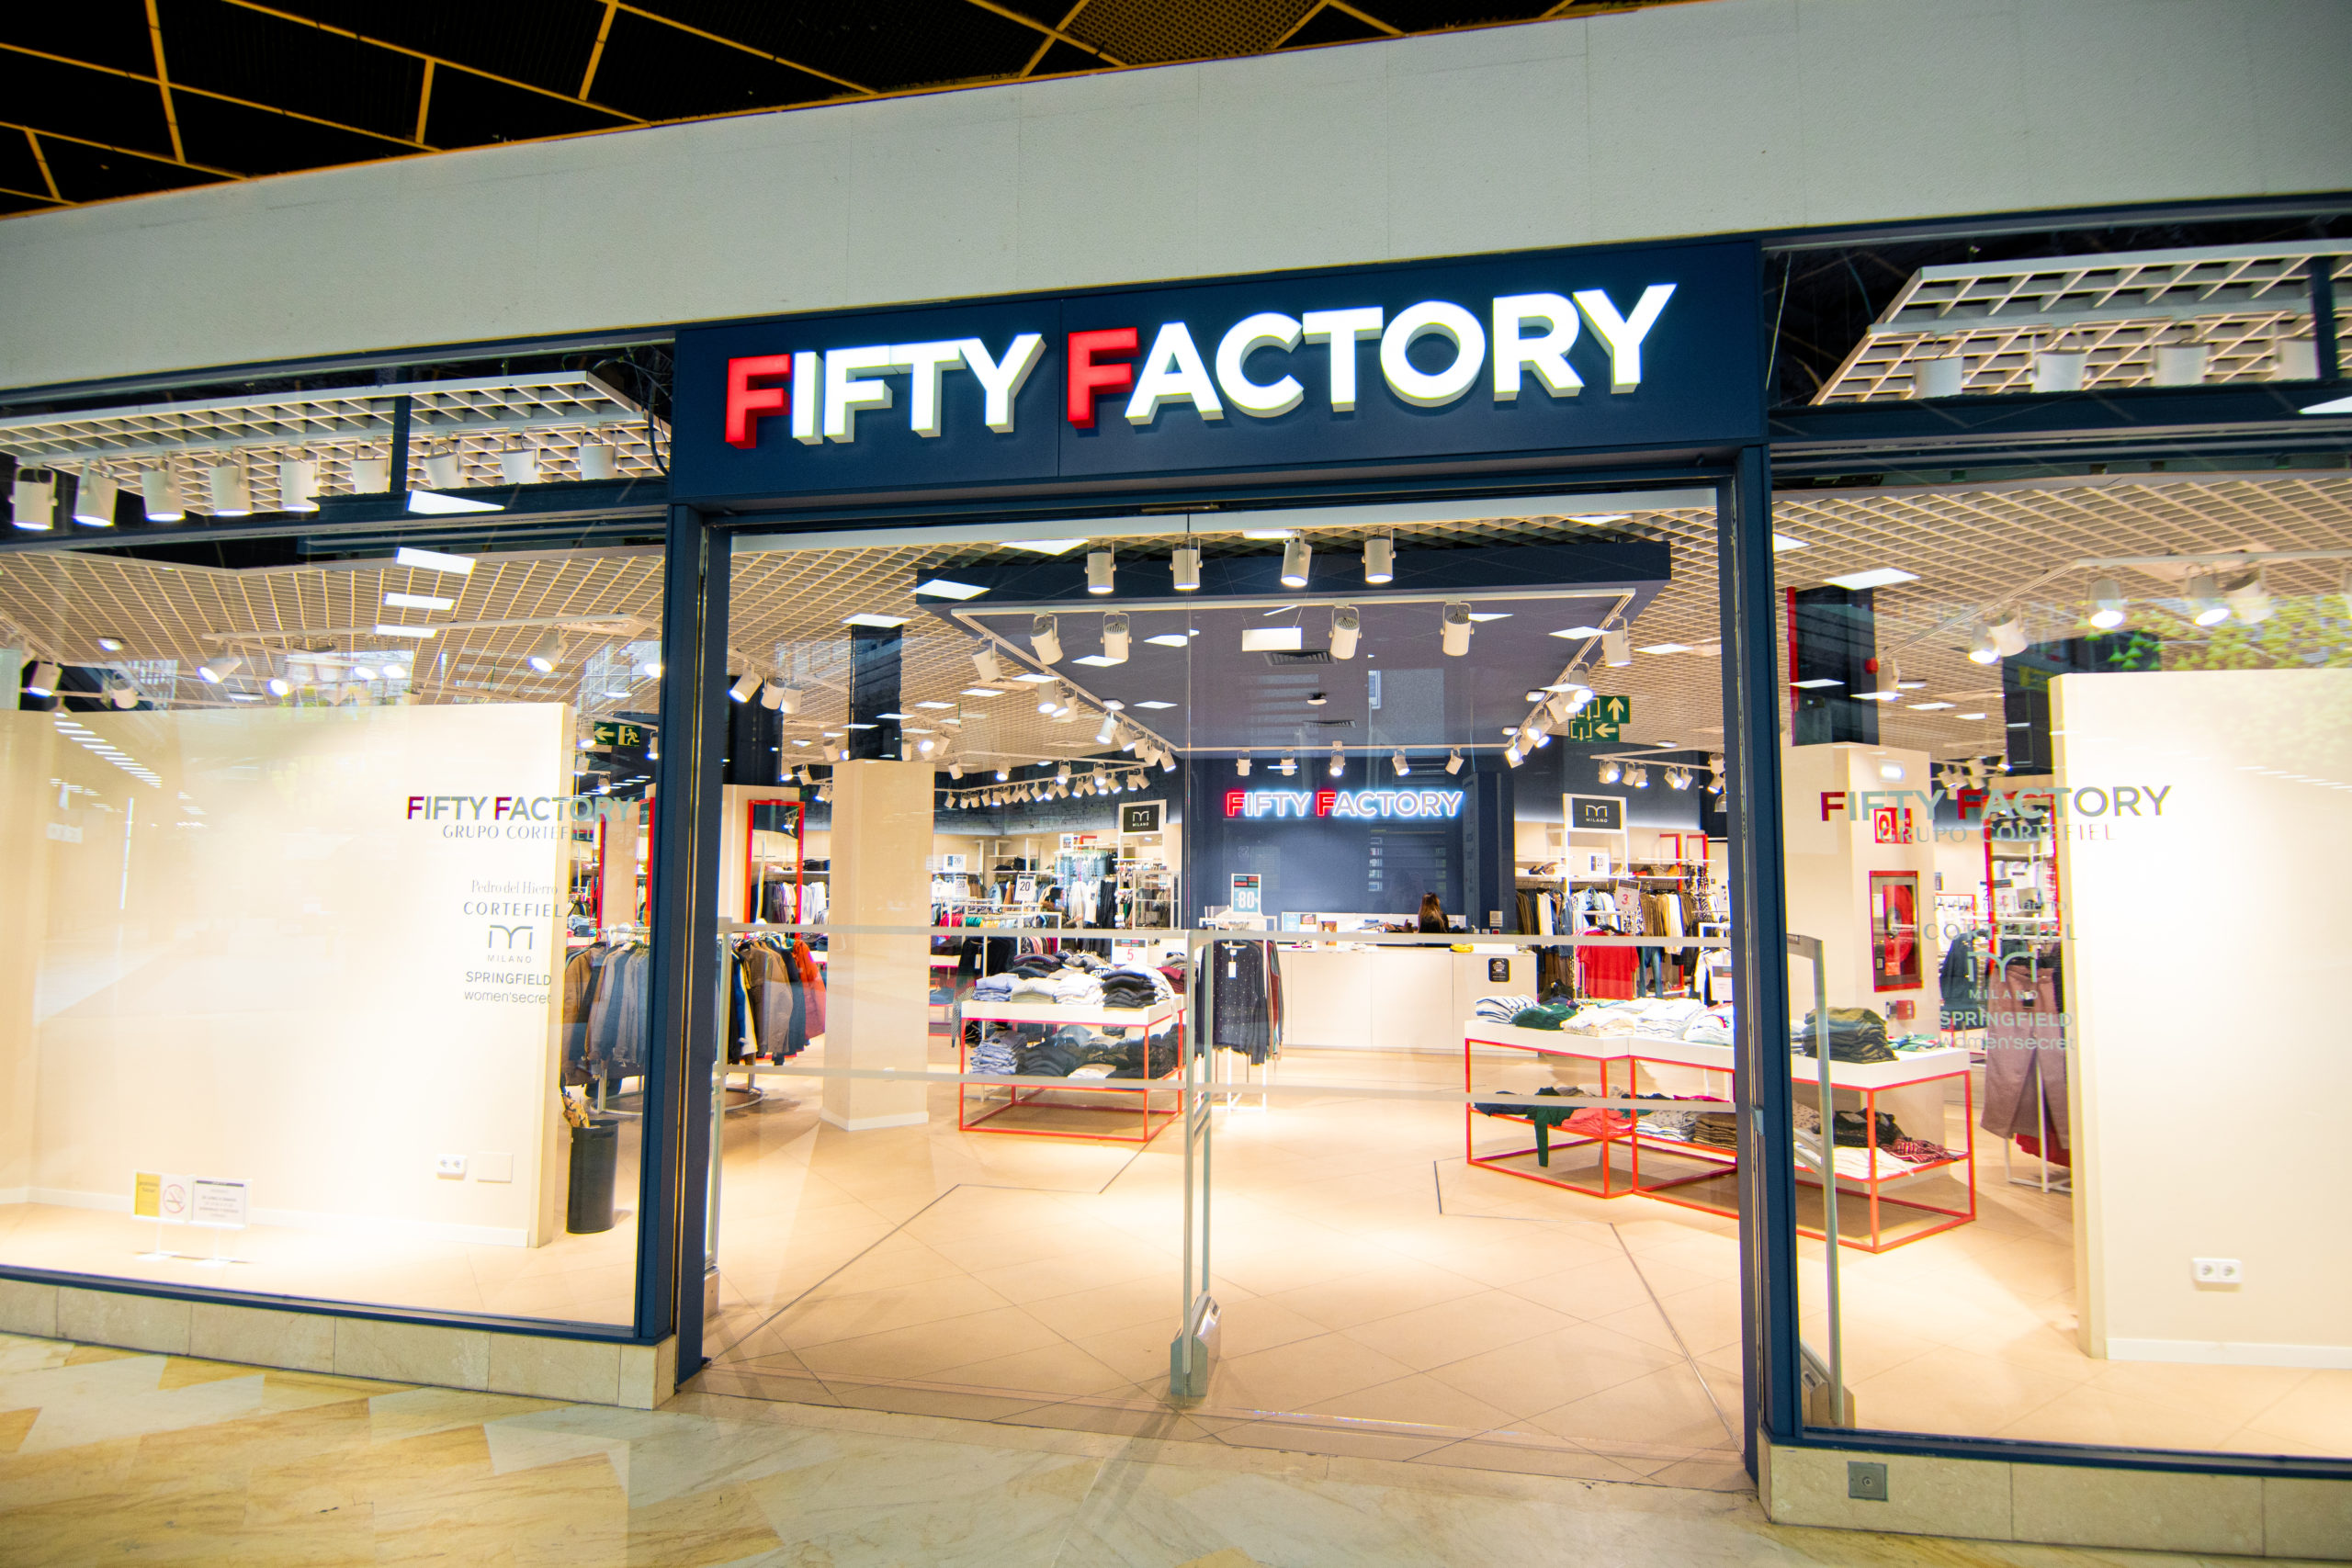 FIFTY FACTORY